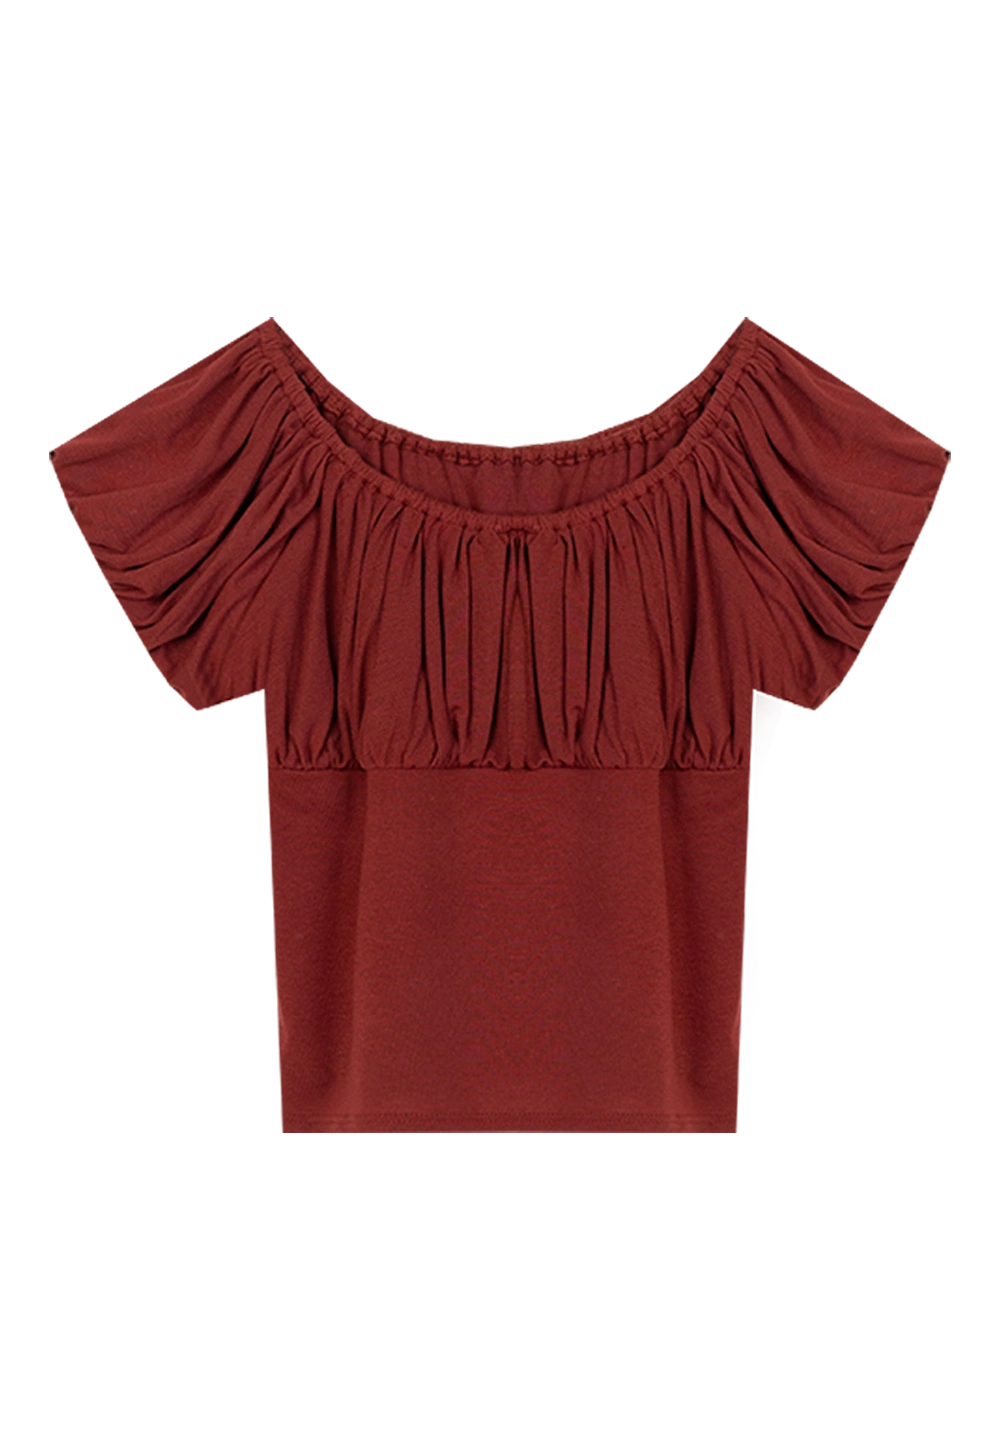 Rust Red Off-Shoulder Top with Ruffle Neckline - Boho Chic Style